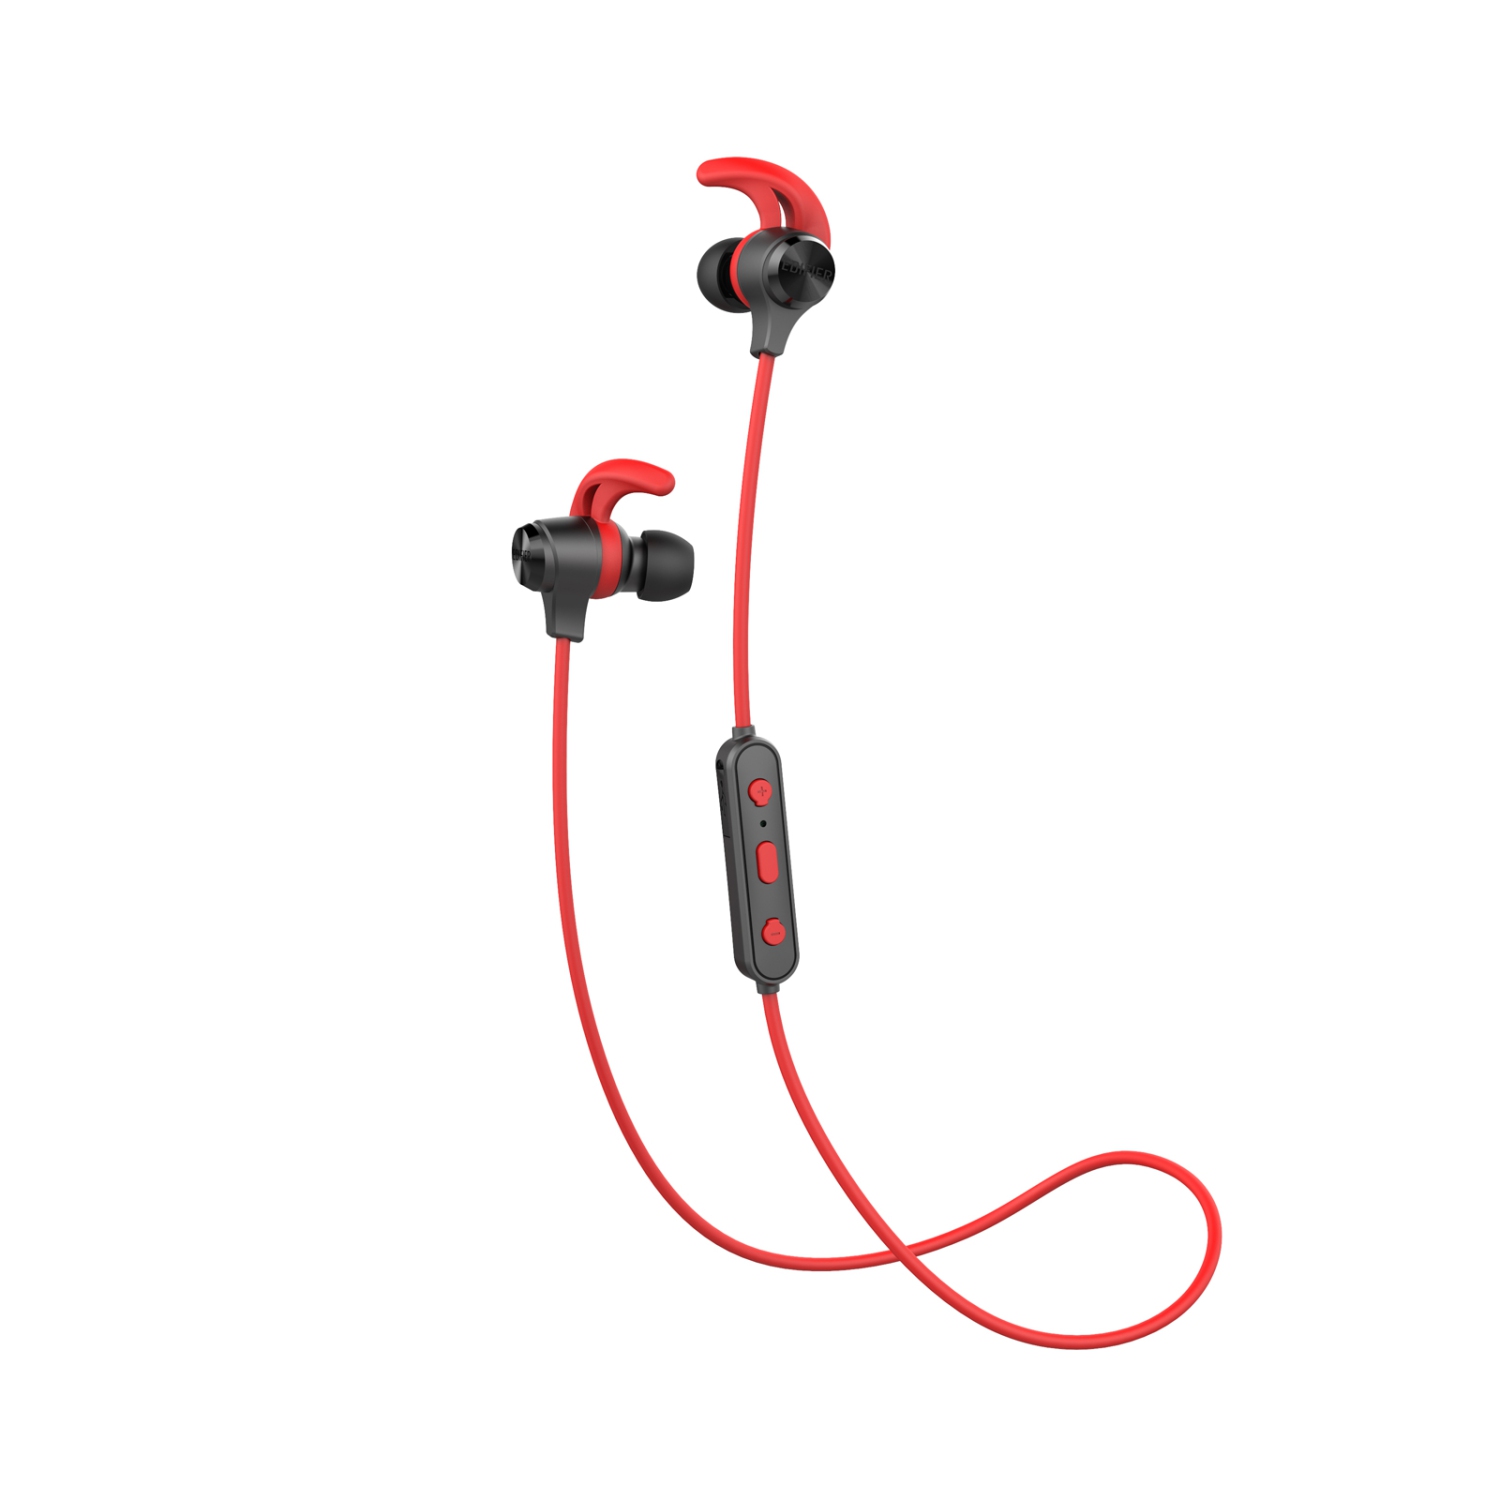 Edifier W280BT Stereo Bluetooth v4.1 Headphones Earphones For Fitness, Running, Working Out Sweatproof - Red